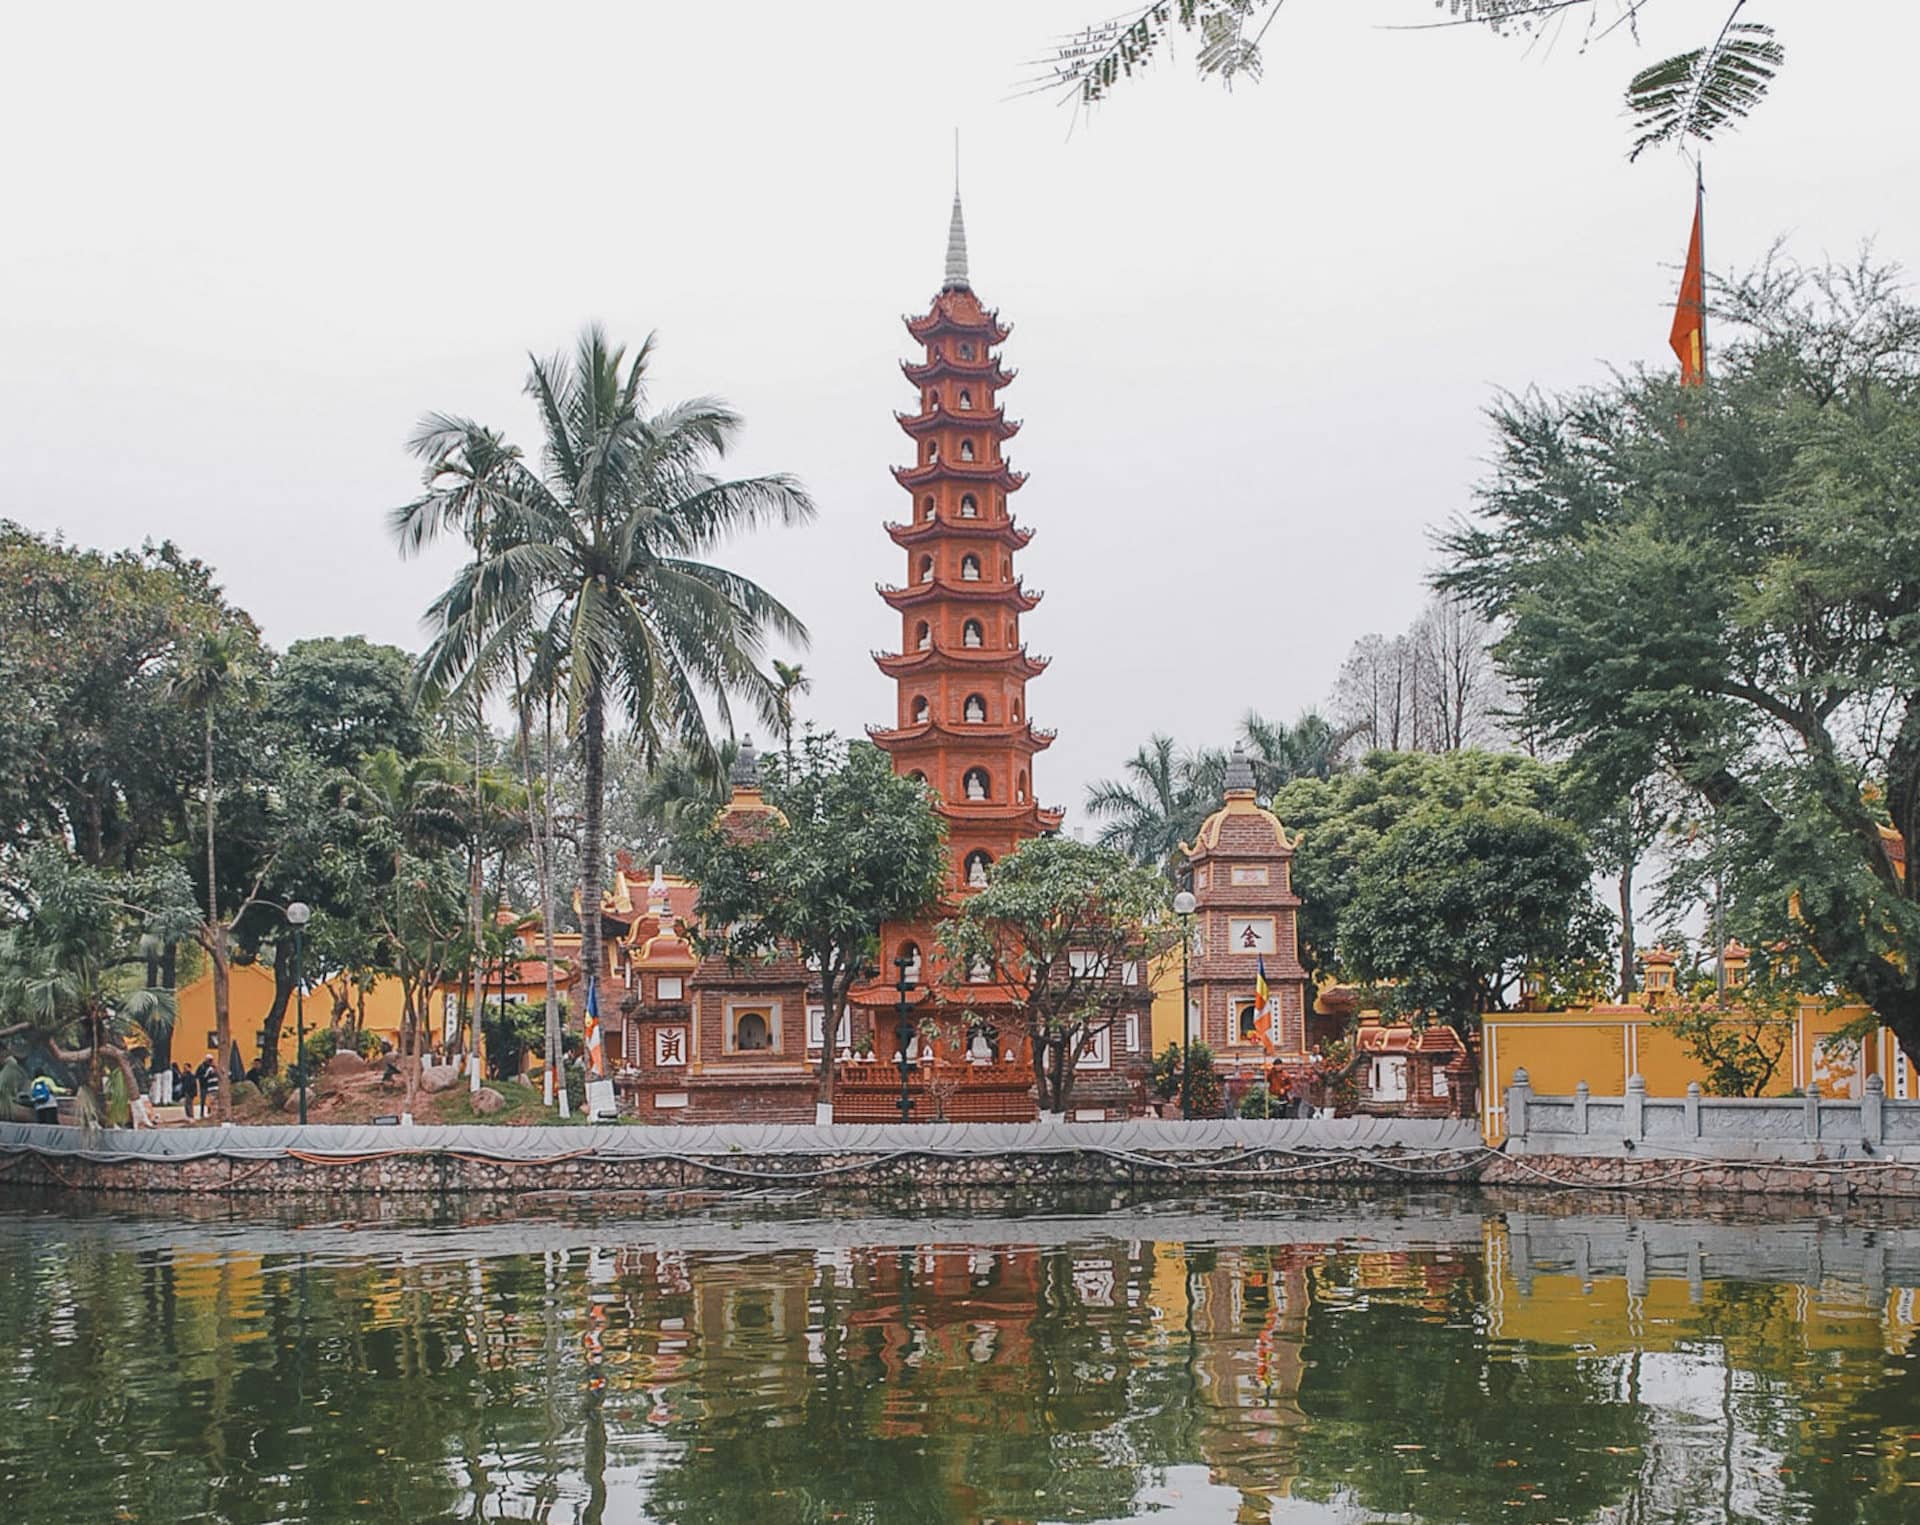 Cheapest Places to Travel In June - Pagoda Vietnam